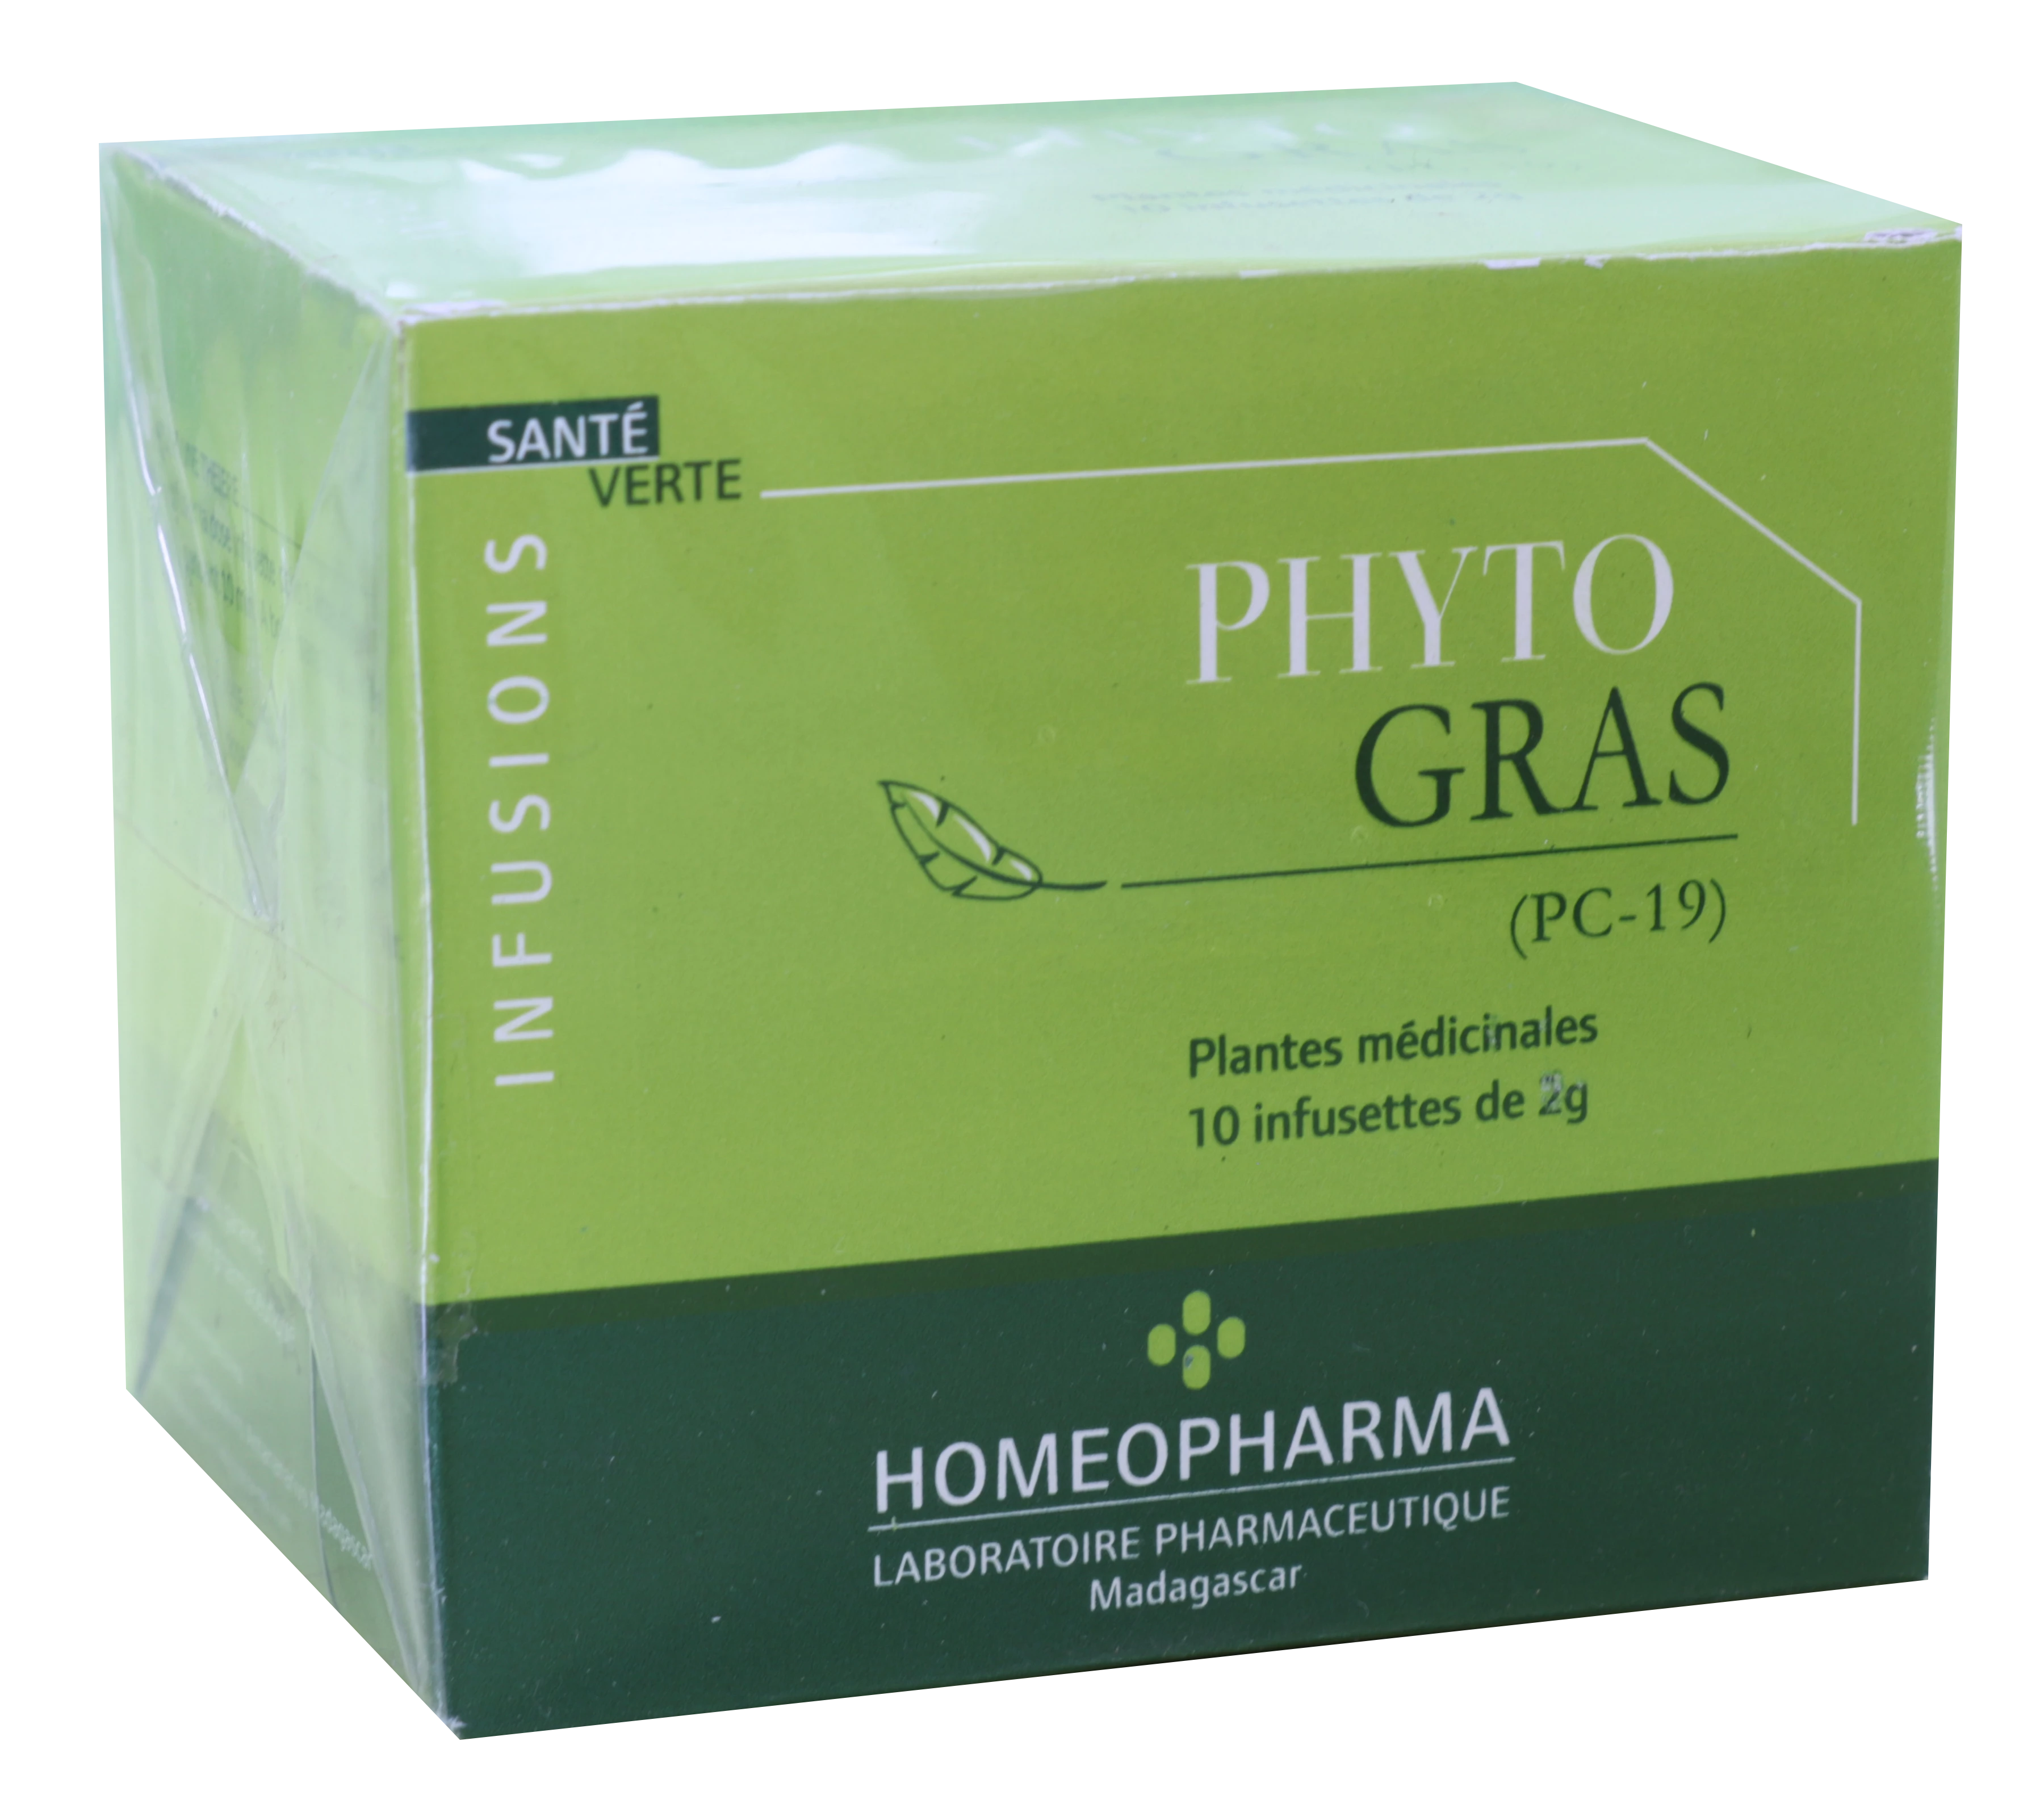 Phytotherapie Traditionnelle  Pc19-phyto-gras Bte / 20 Infusettes - Homeopharma